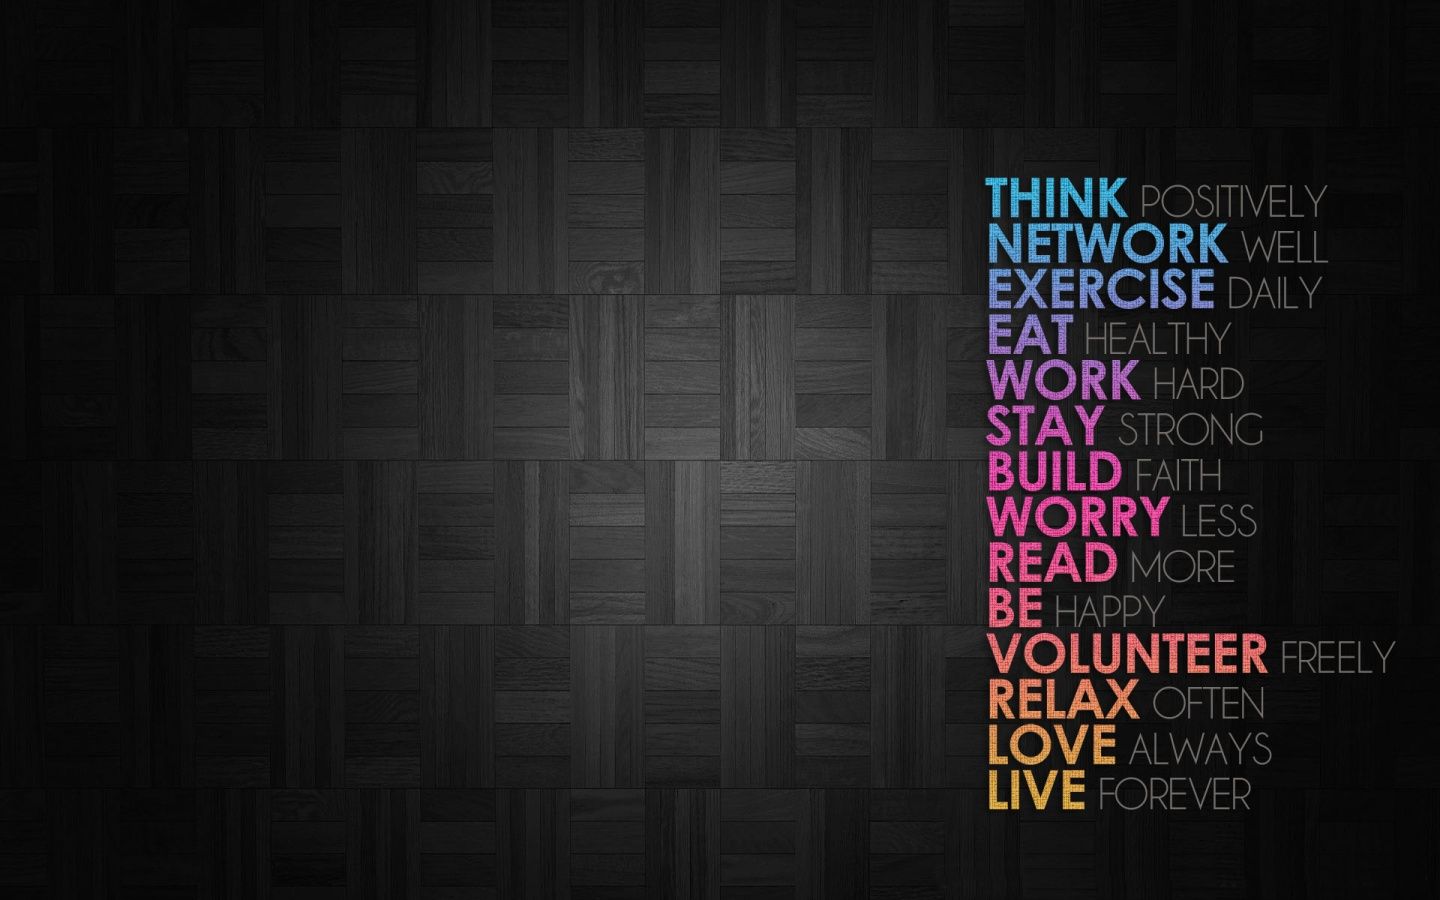 Free download Positive Thinking Wallpaper for Desktop The Art Mad Wallpaper [1440x900] for your Desktop, Mobile & Tablet. Explore Positive Thoughts Wallpaper. Motivational Desktop Wallpaper, Free Inspirational Wallpaper, Spiritual